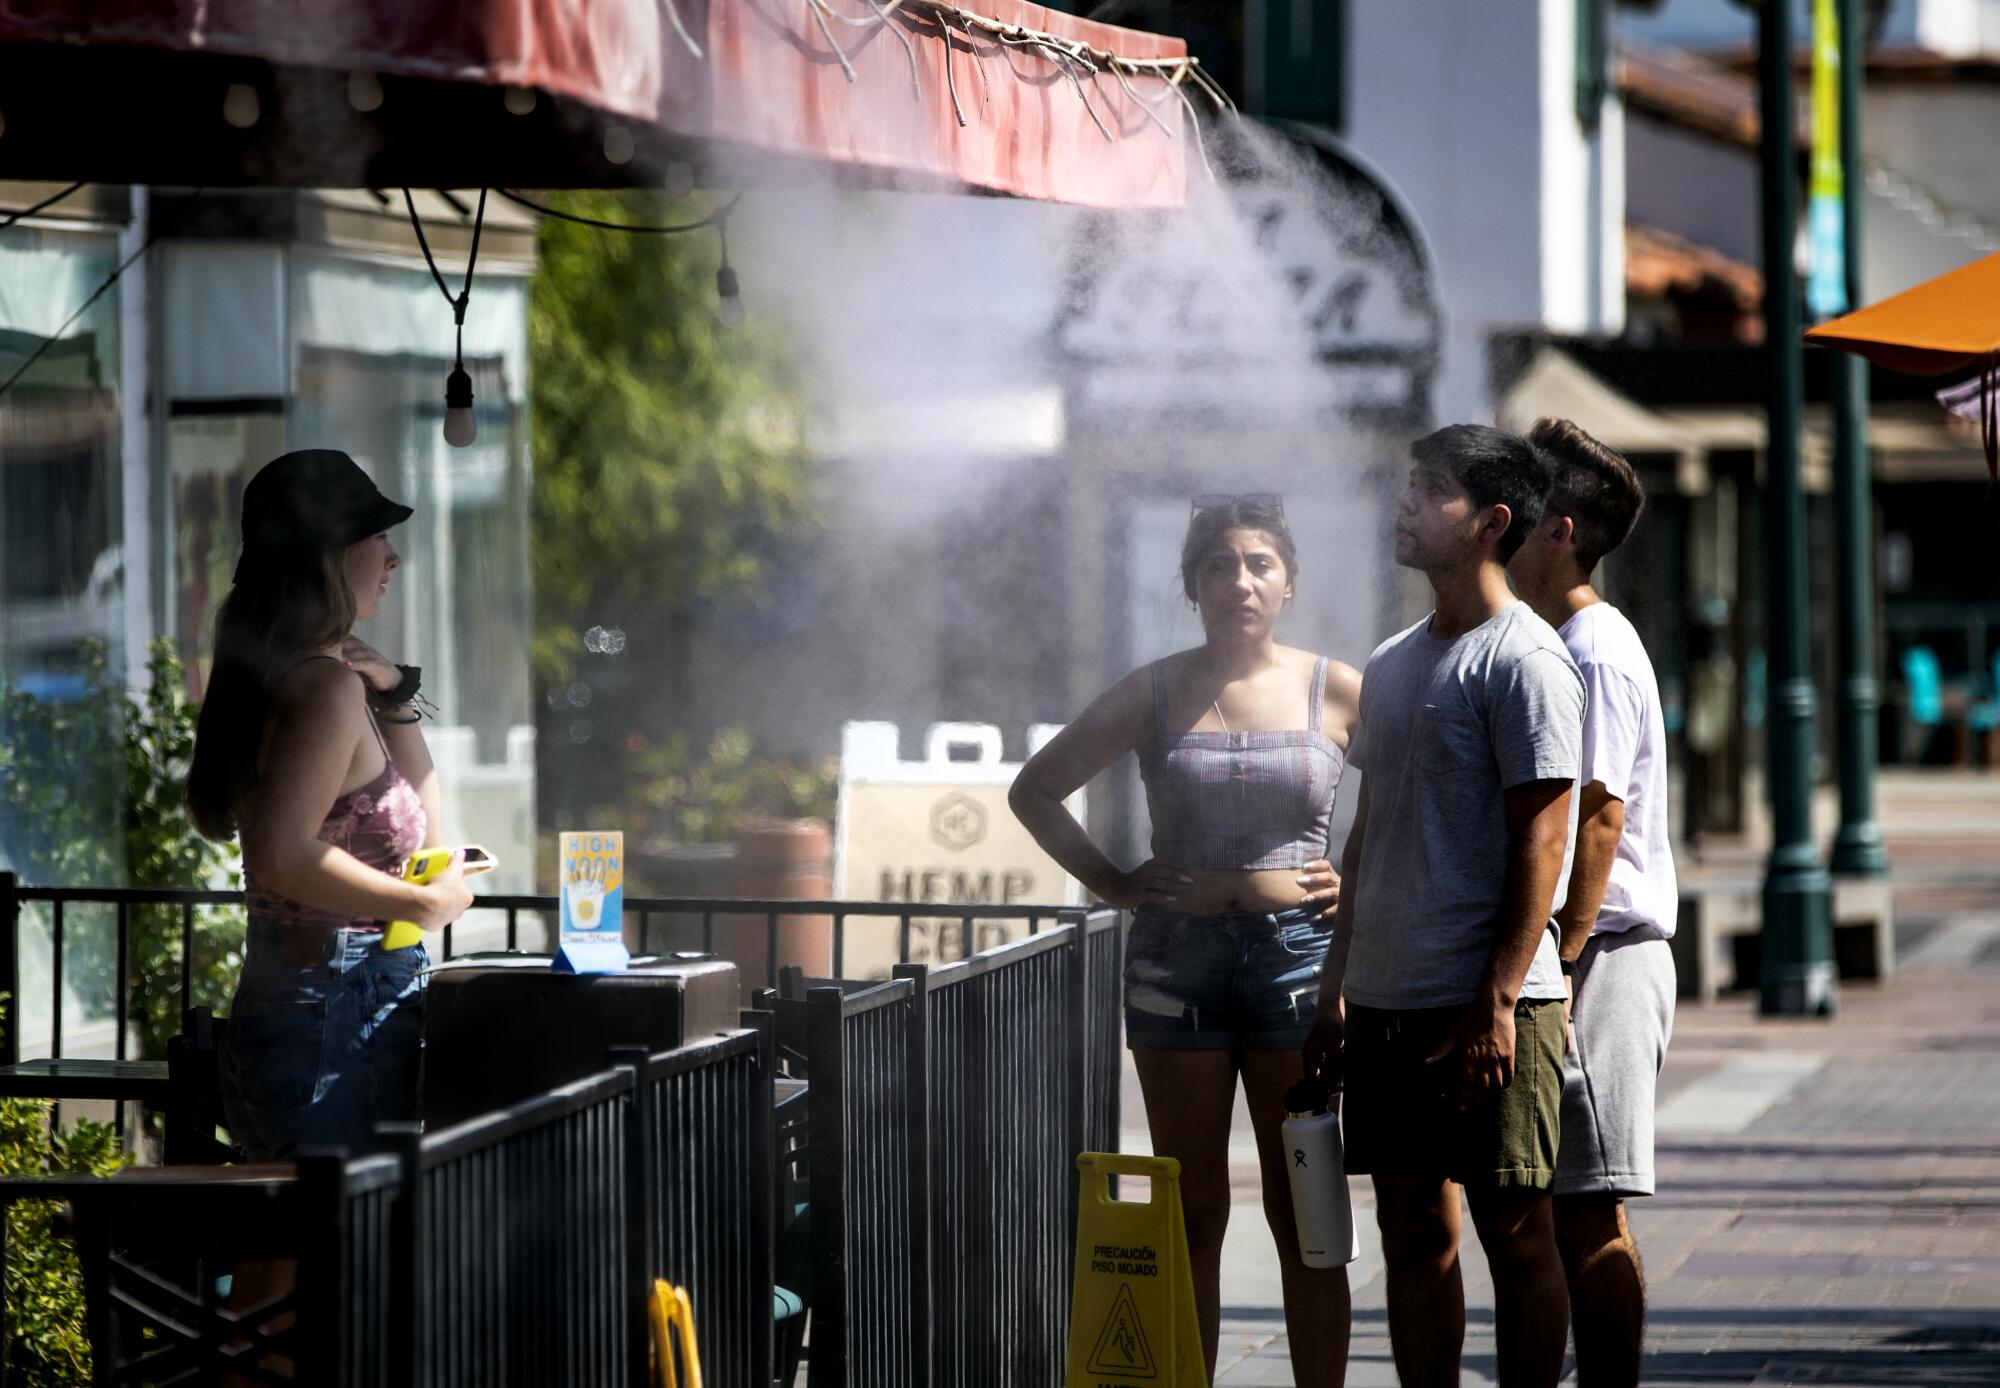 Customers cool off at a downtown restaurant mister in Palm Springs.